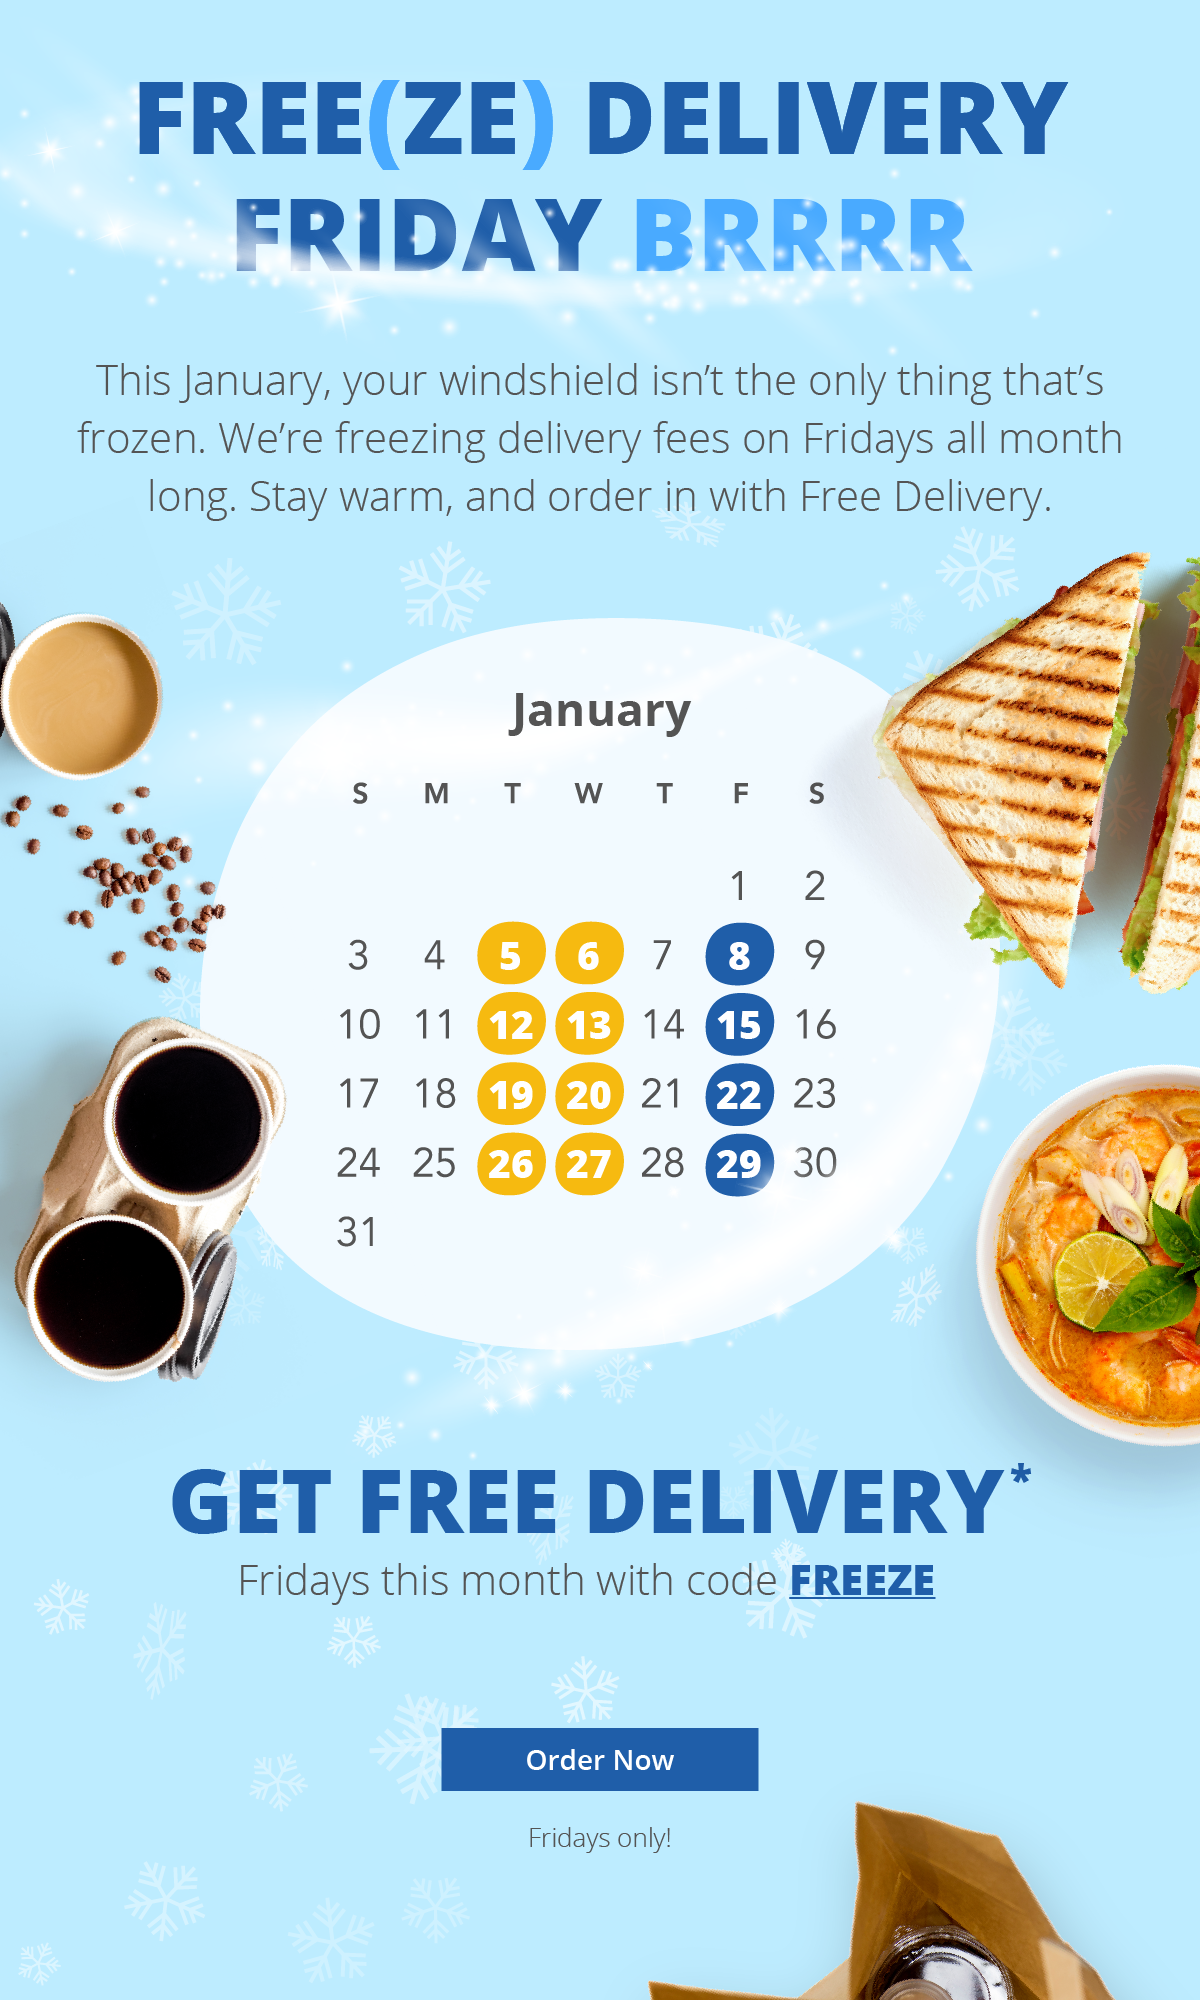 Free(ze) Delivery Friday